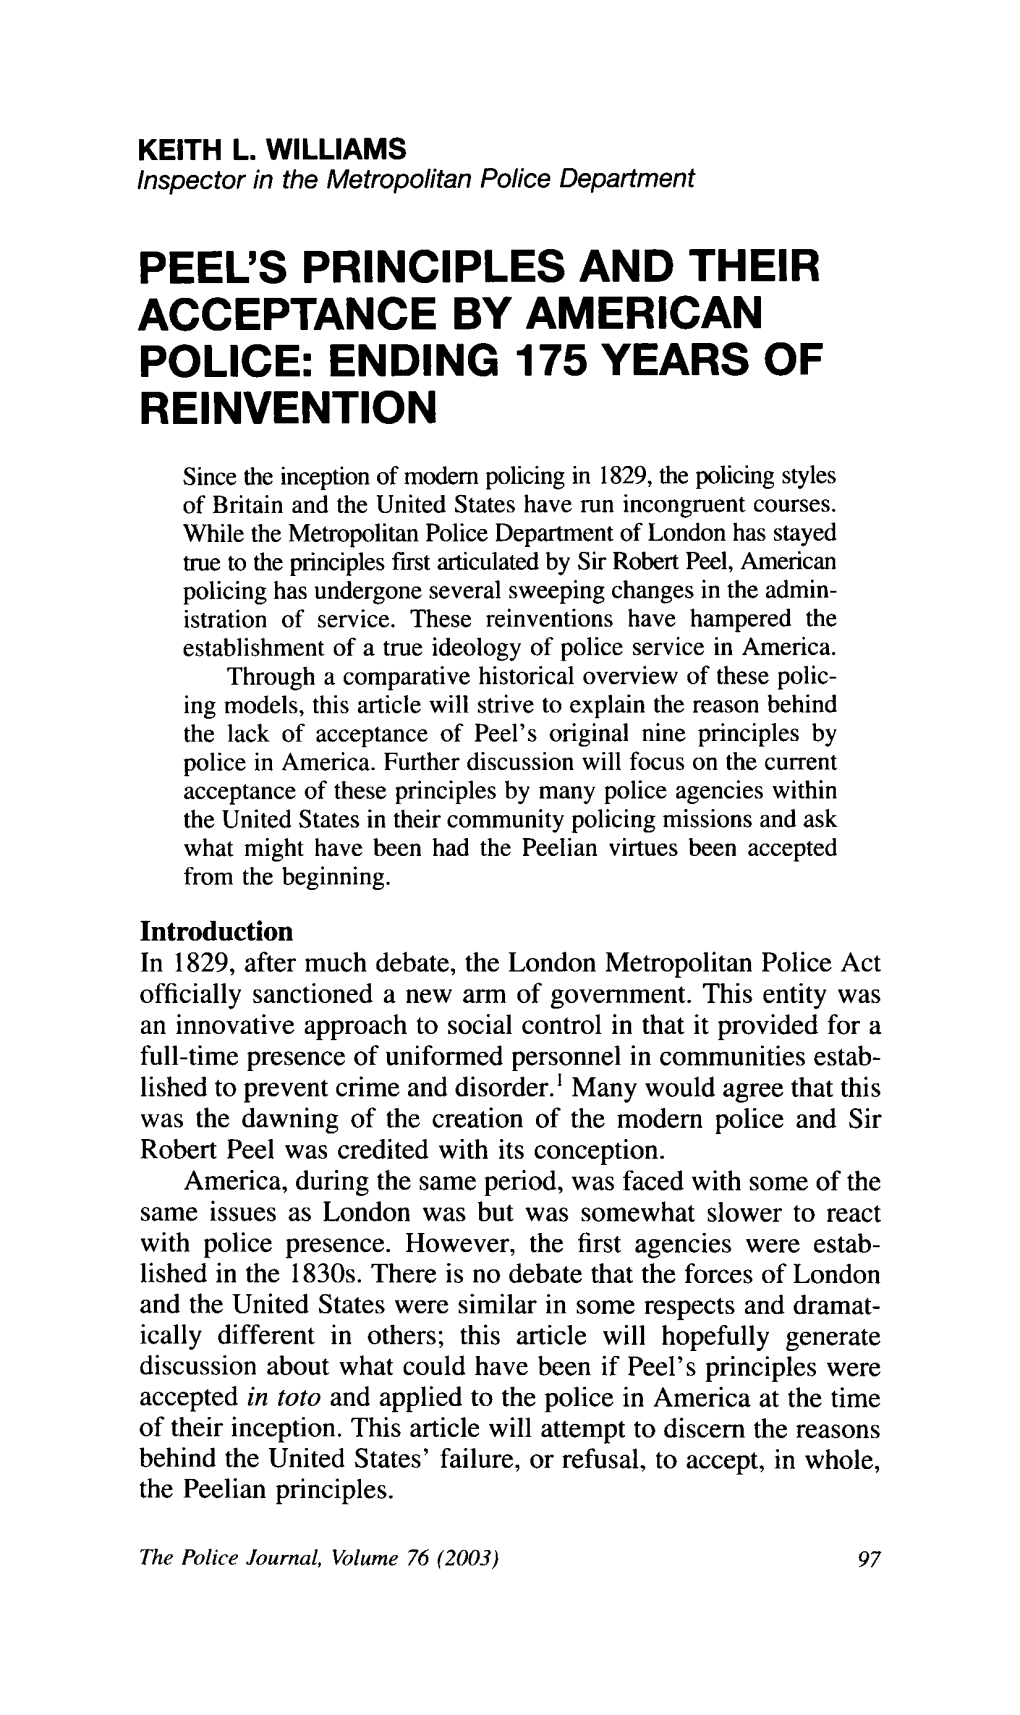 Peel's Principles and Their Acceptance by American Police: Ending 175 Years of Reinvention